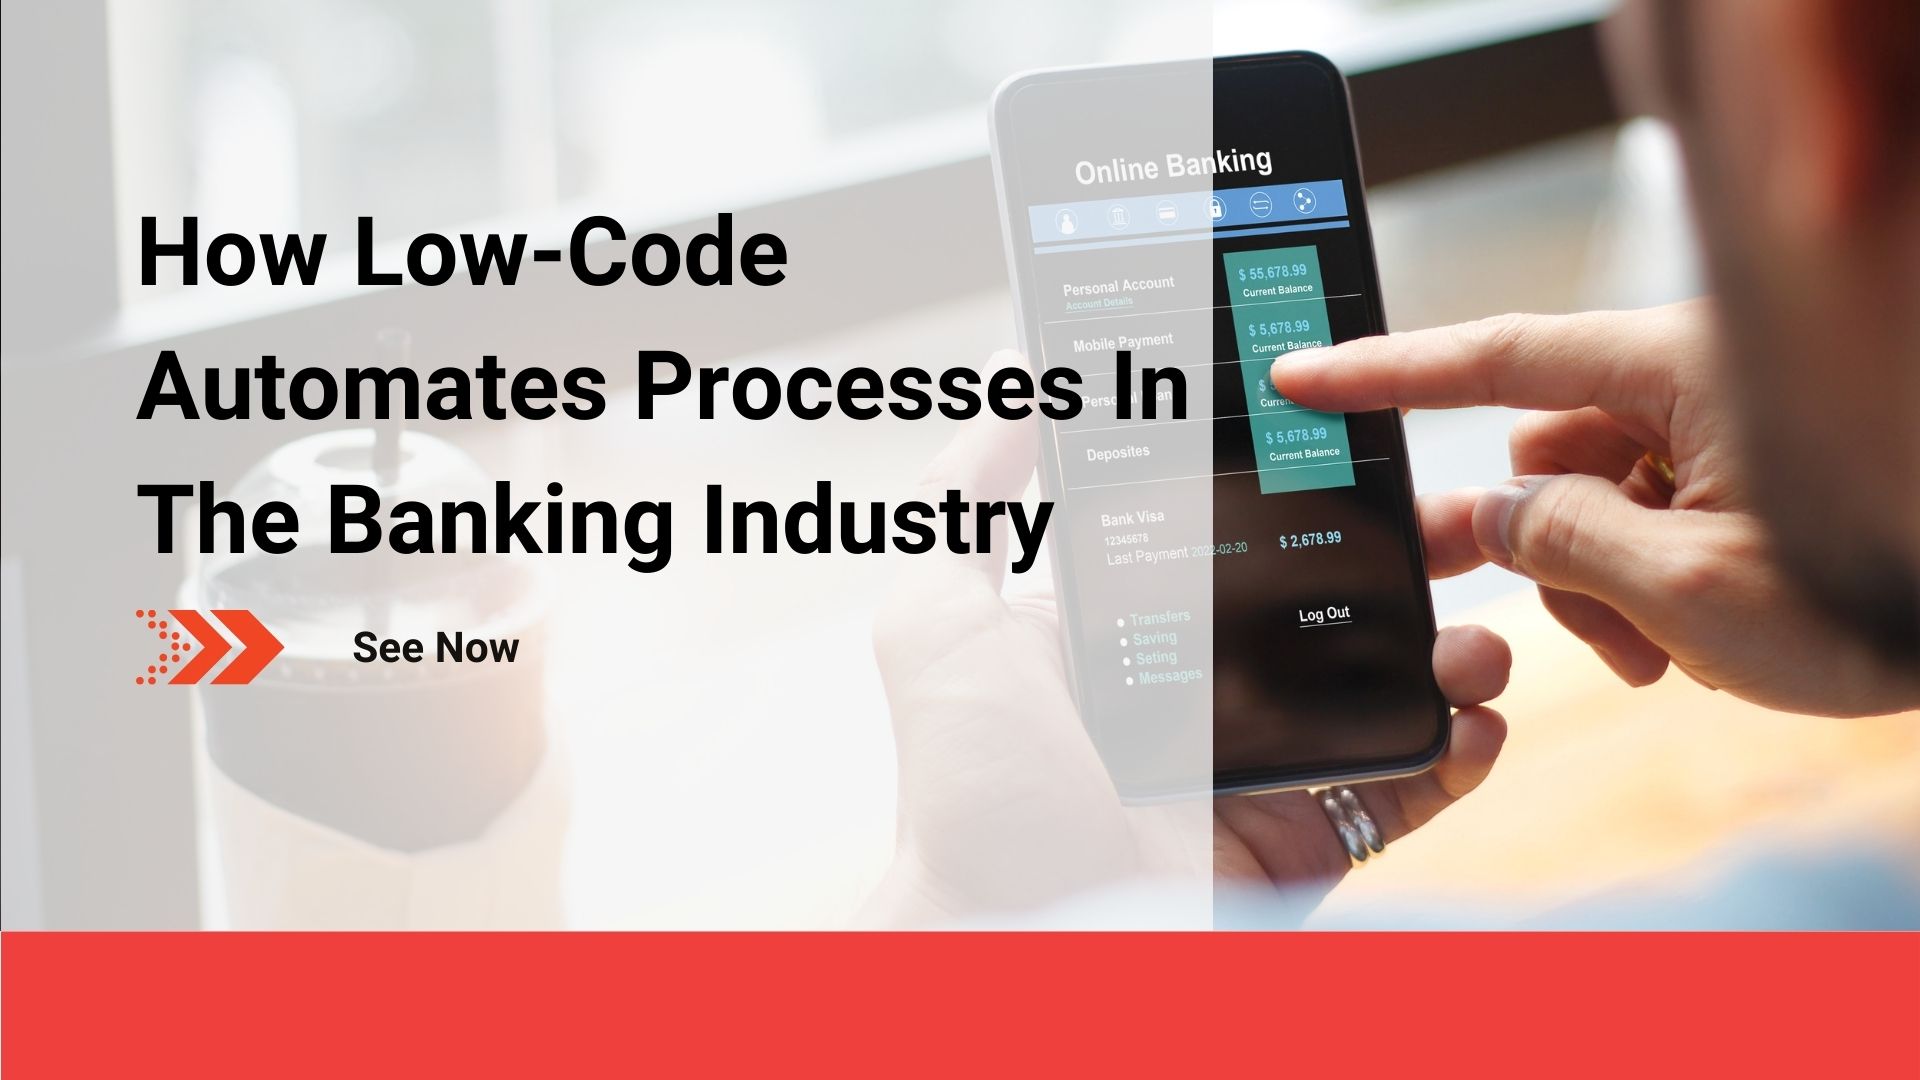 How Low-Code Automates Processes In The Banking Industry